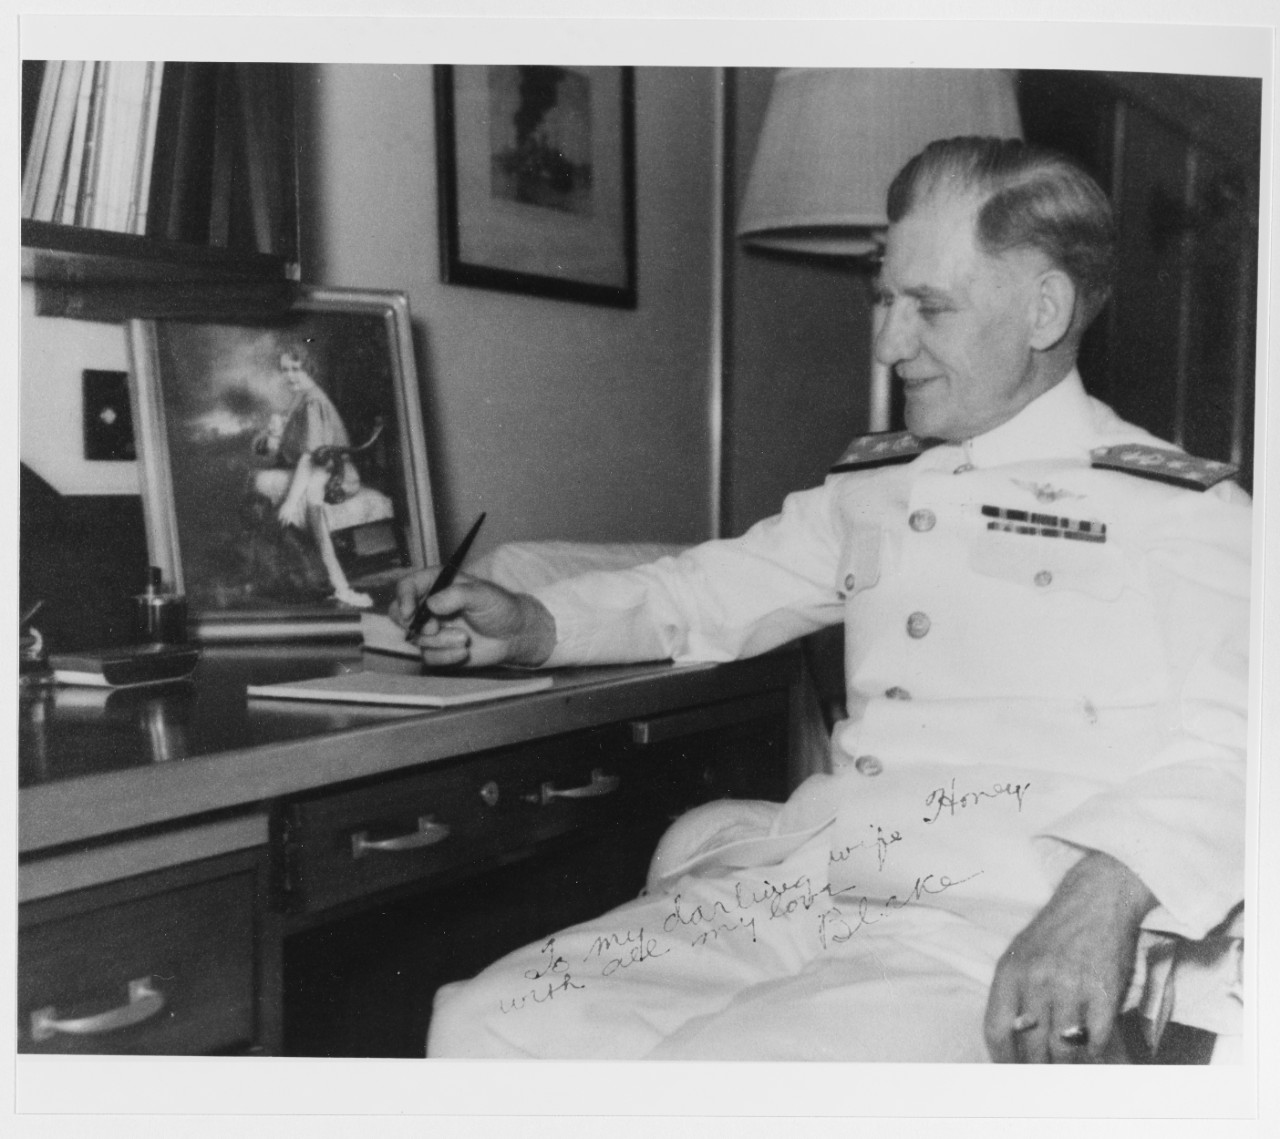 Photo #: NH 95346 Vice Admiral Charles A. Blakely